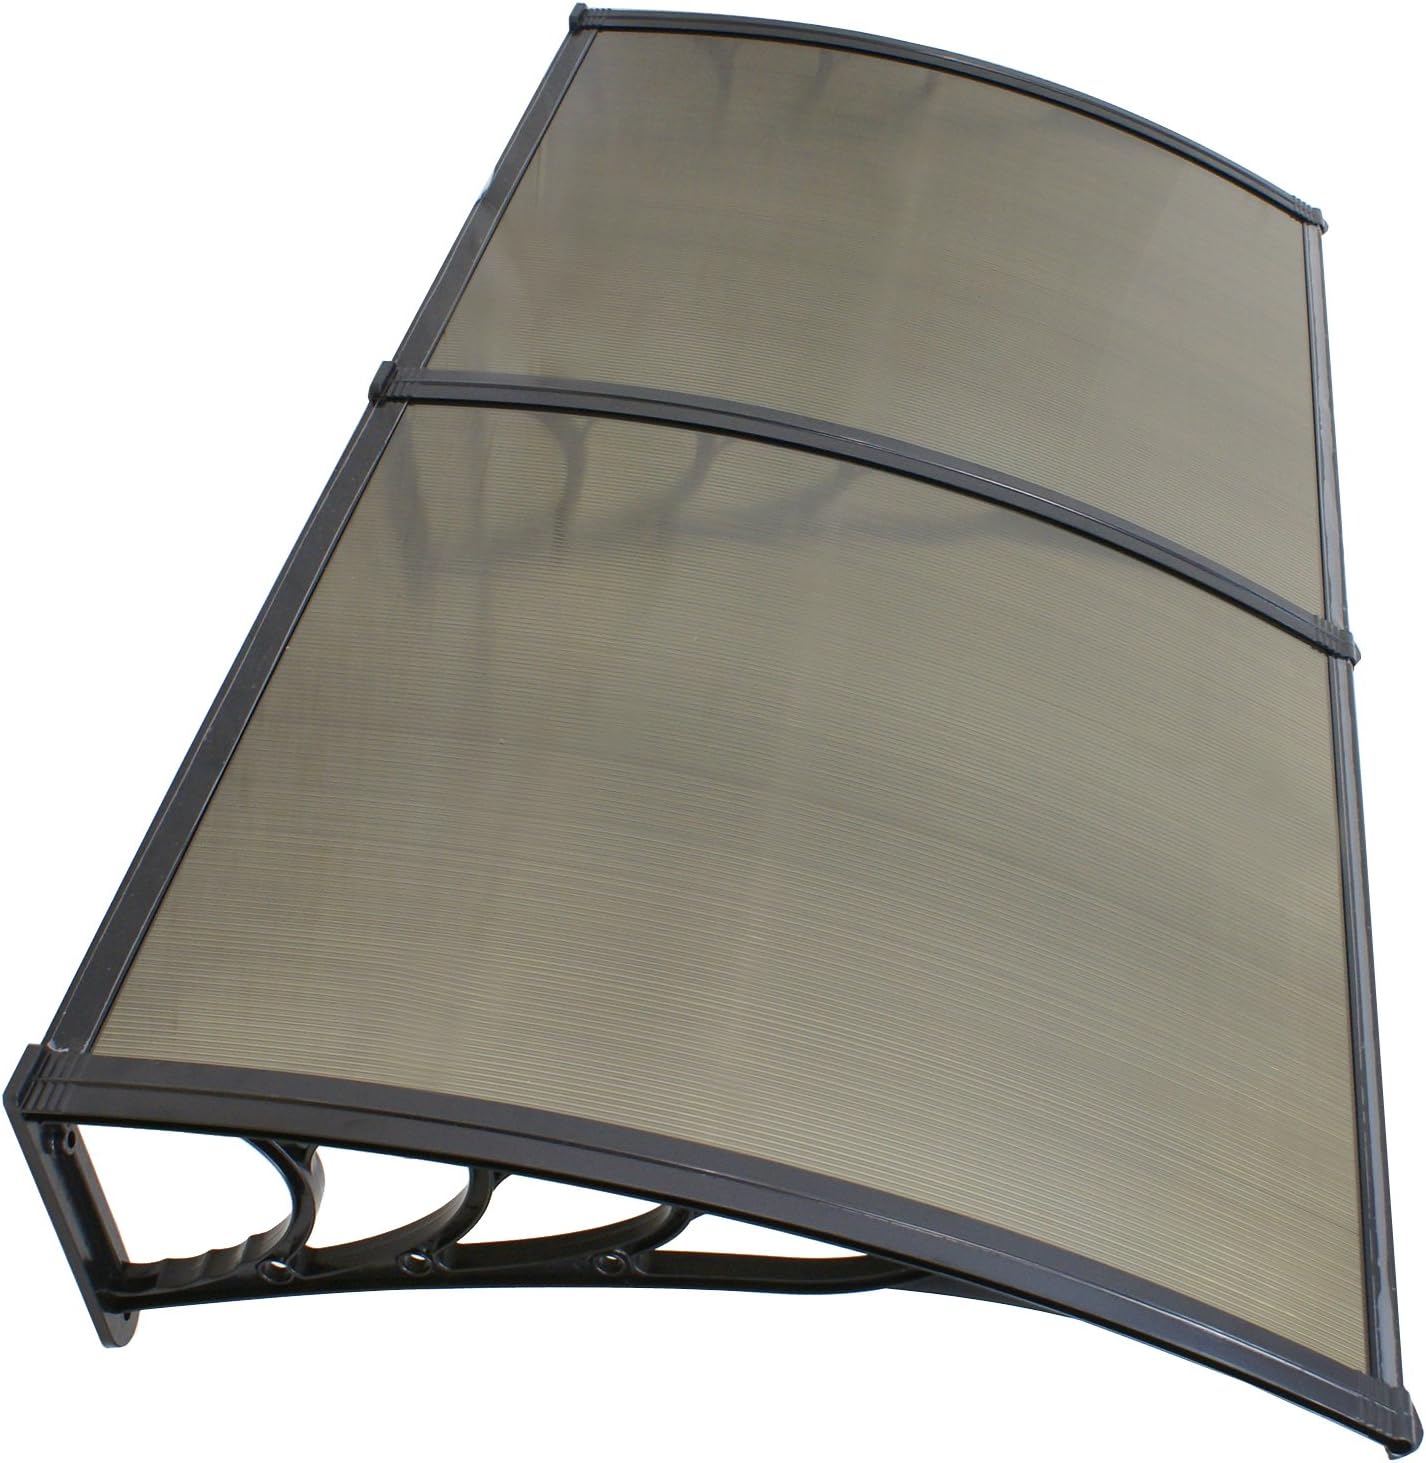 40 inch x 80 inch Window Awning Door Canopy Polycarbonate Cover Outdoor Front Door Patio Sun Shetter (Brown 1pcs)